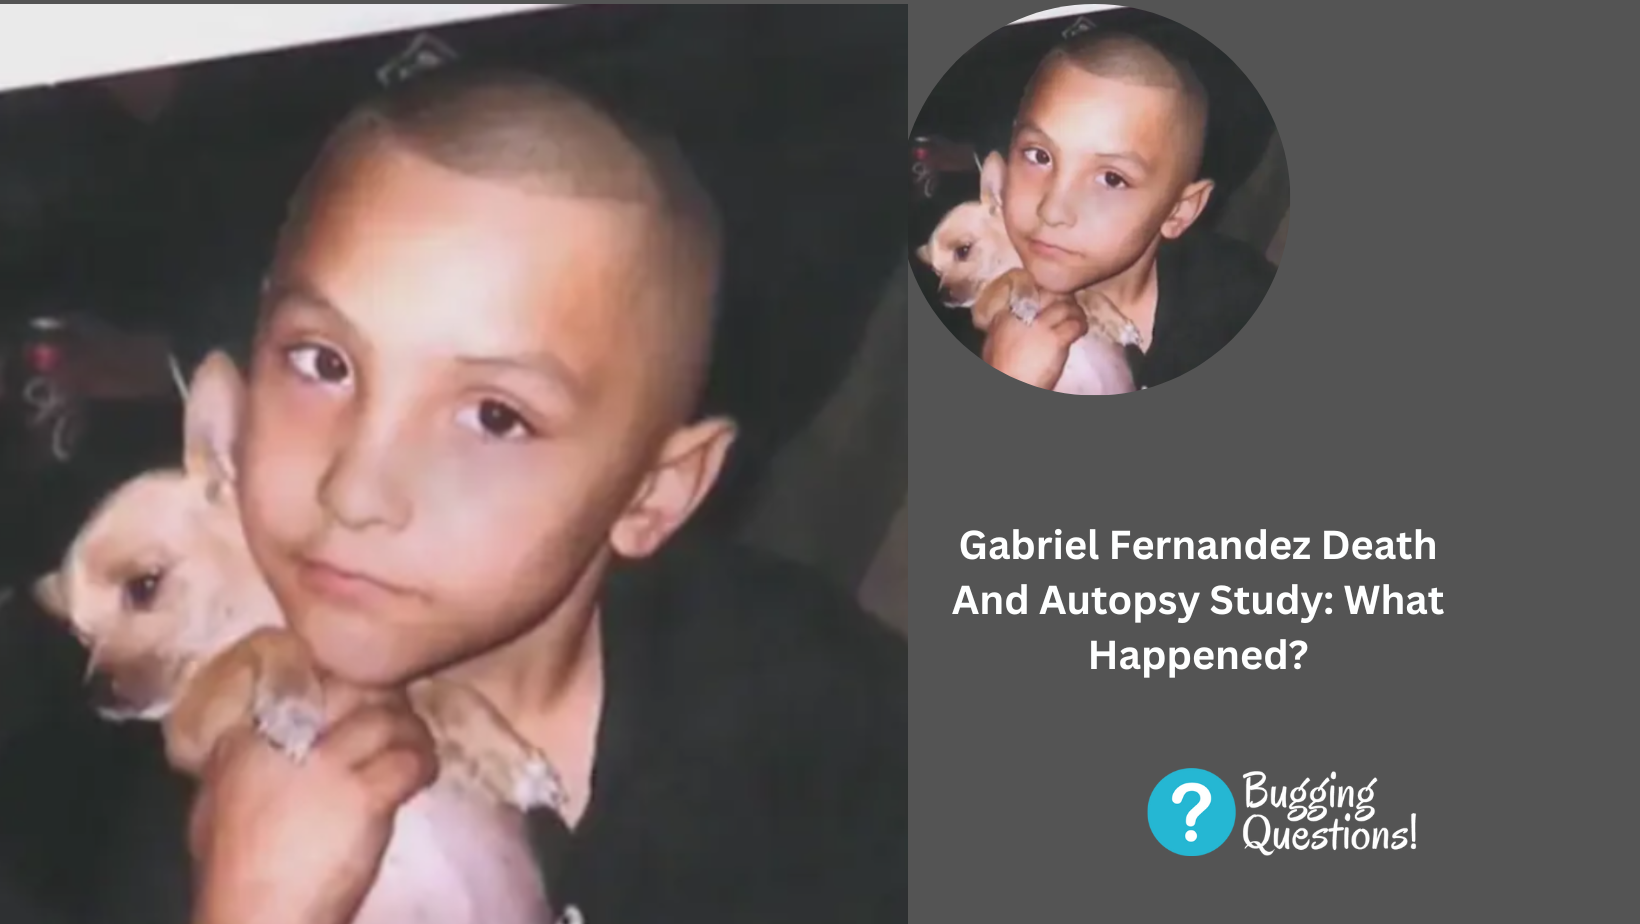 Gabriel Fernandez Death And Autopsy Study: What Happened?